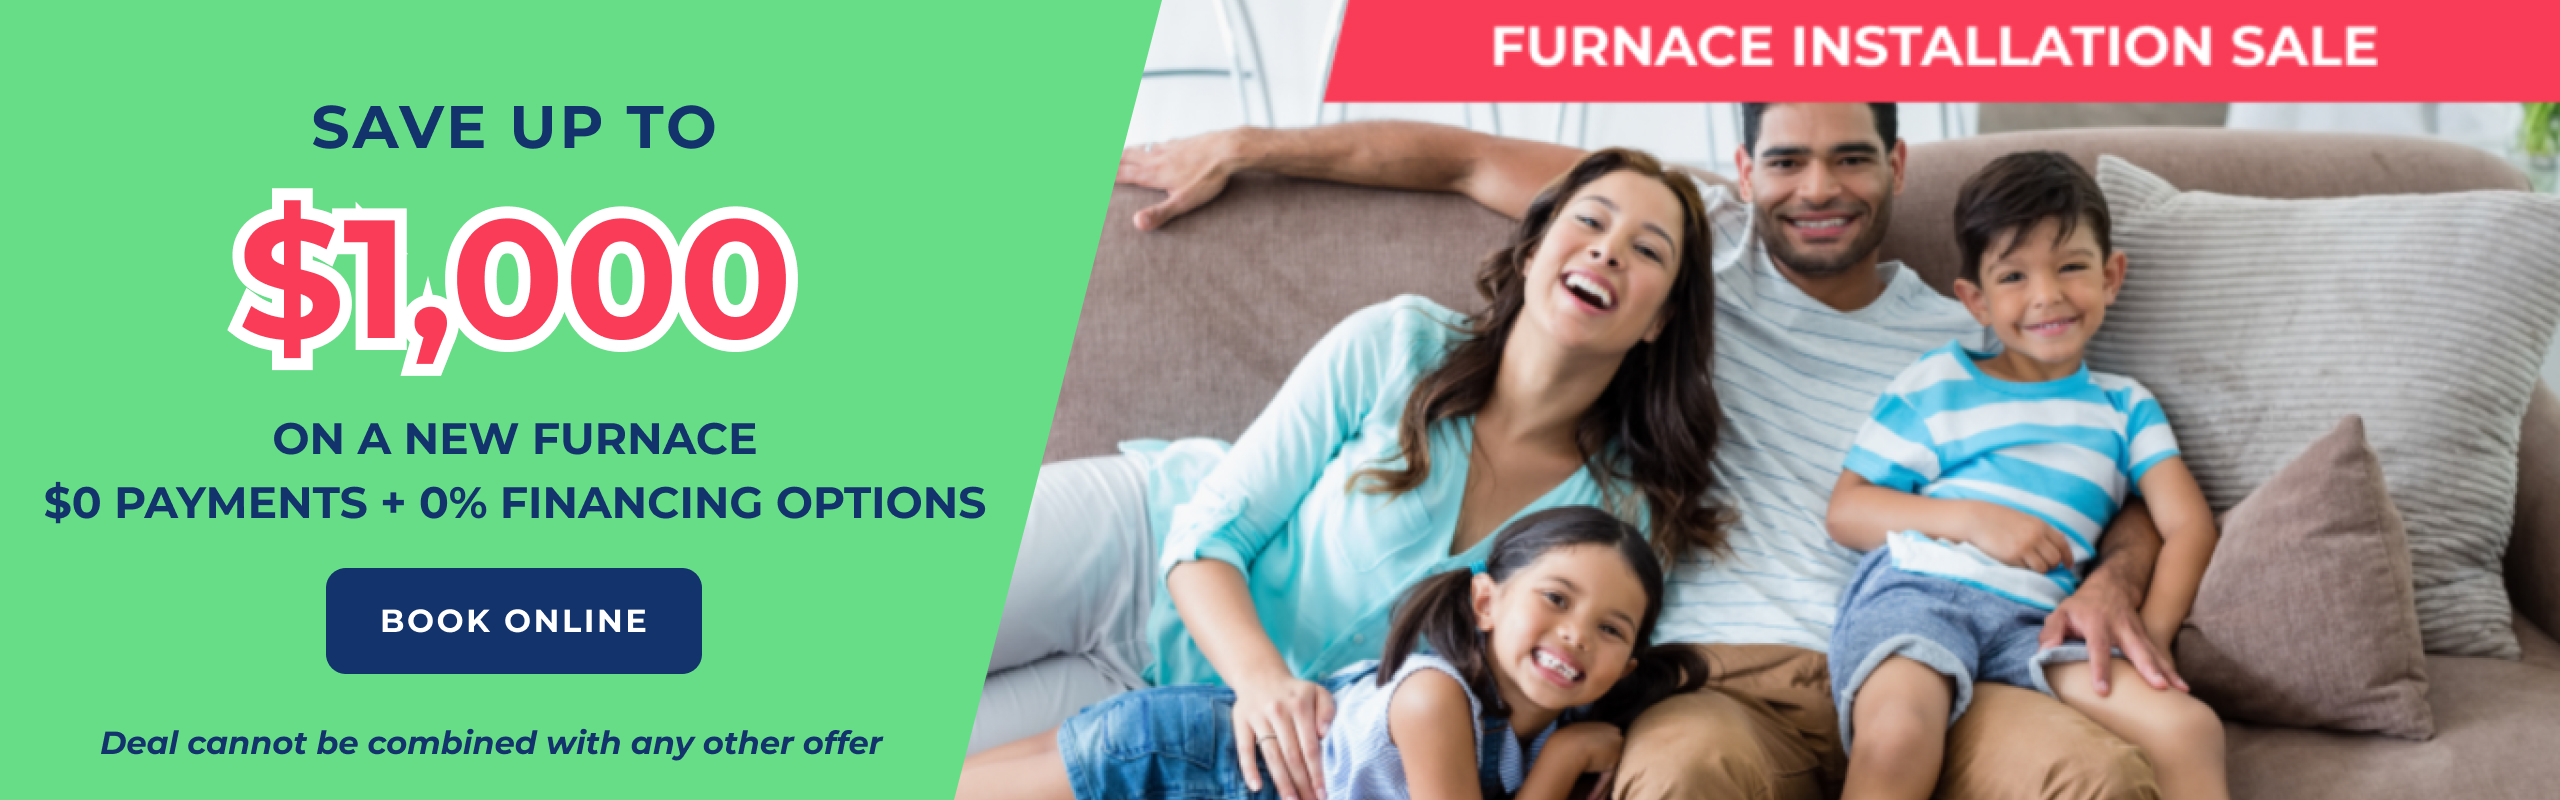 Home Heating Services in Kingston: Save up to $1000 on a new furnace